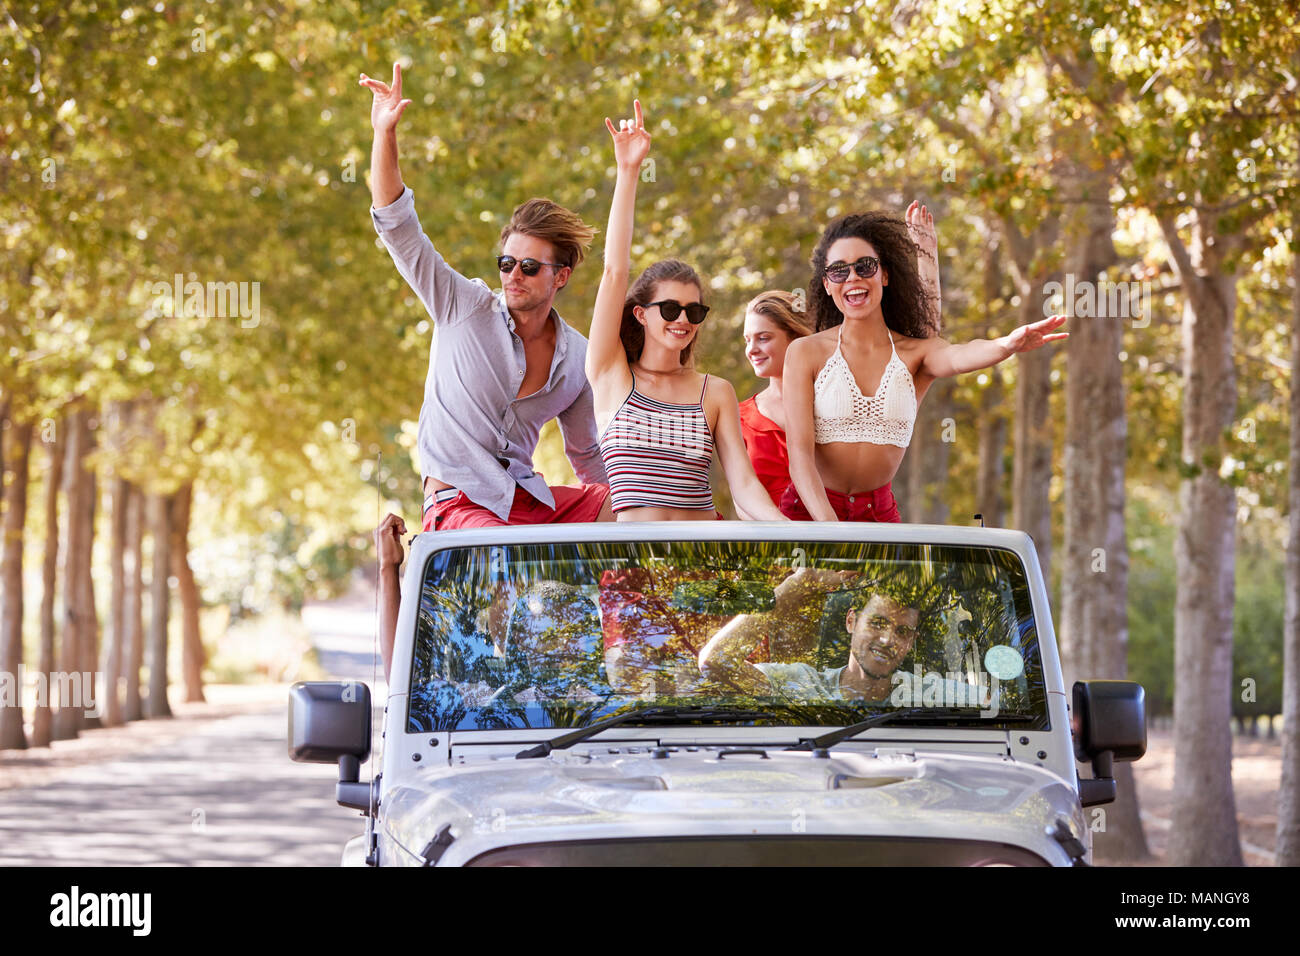 Friends having fun standing in the back of an open top car Stock Photo